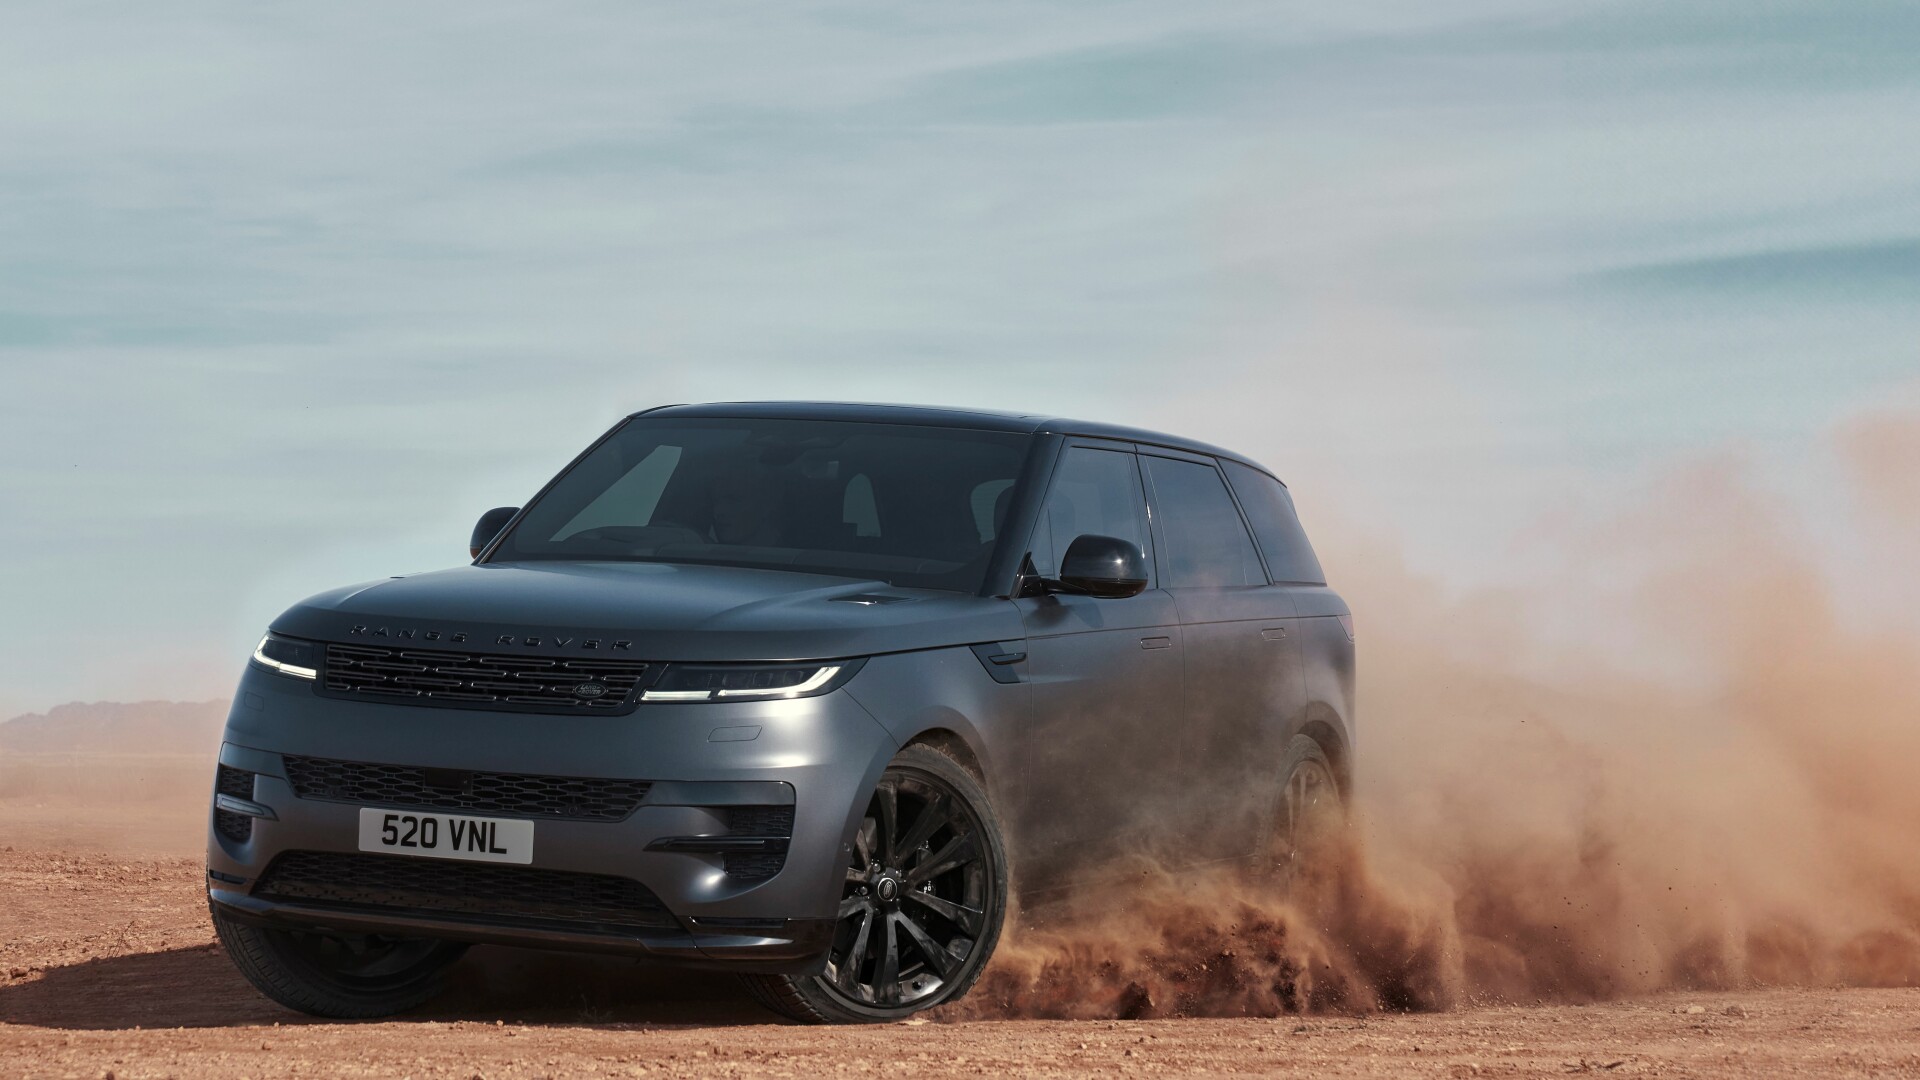 Range Rover Sport driving in the sand